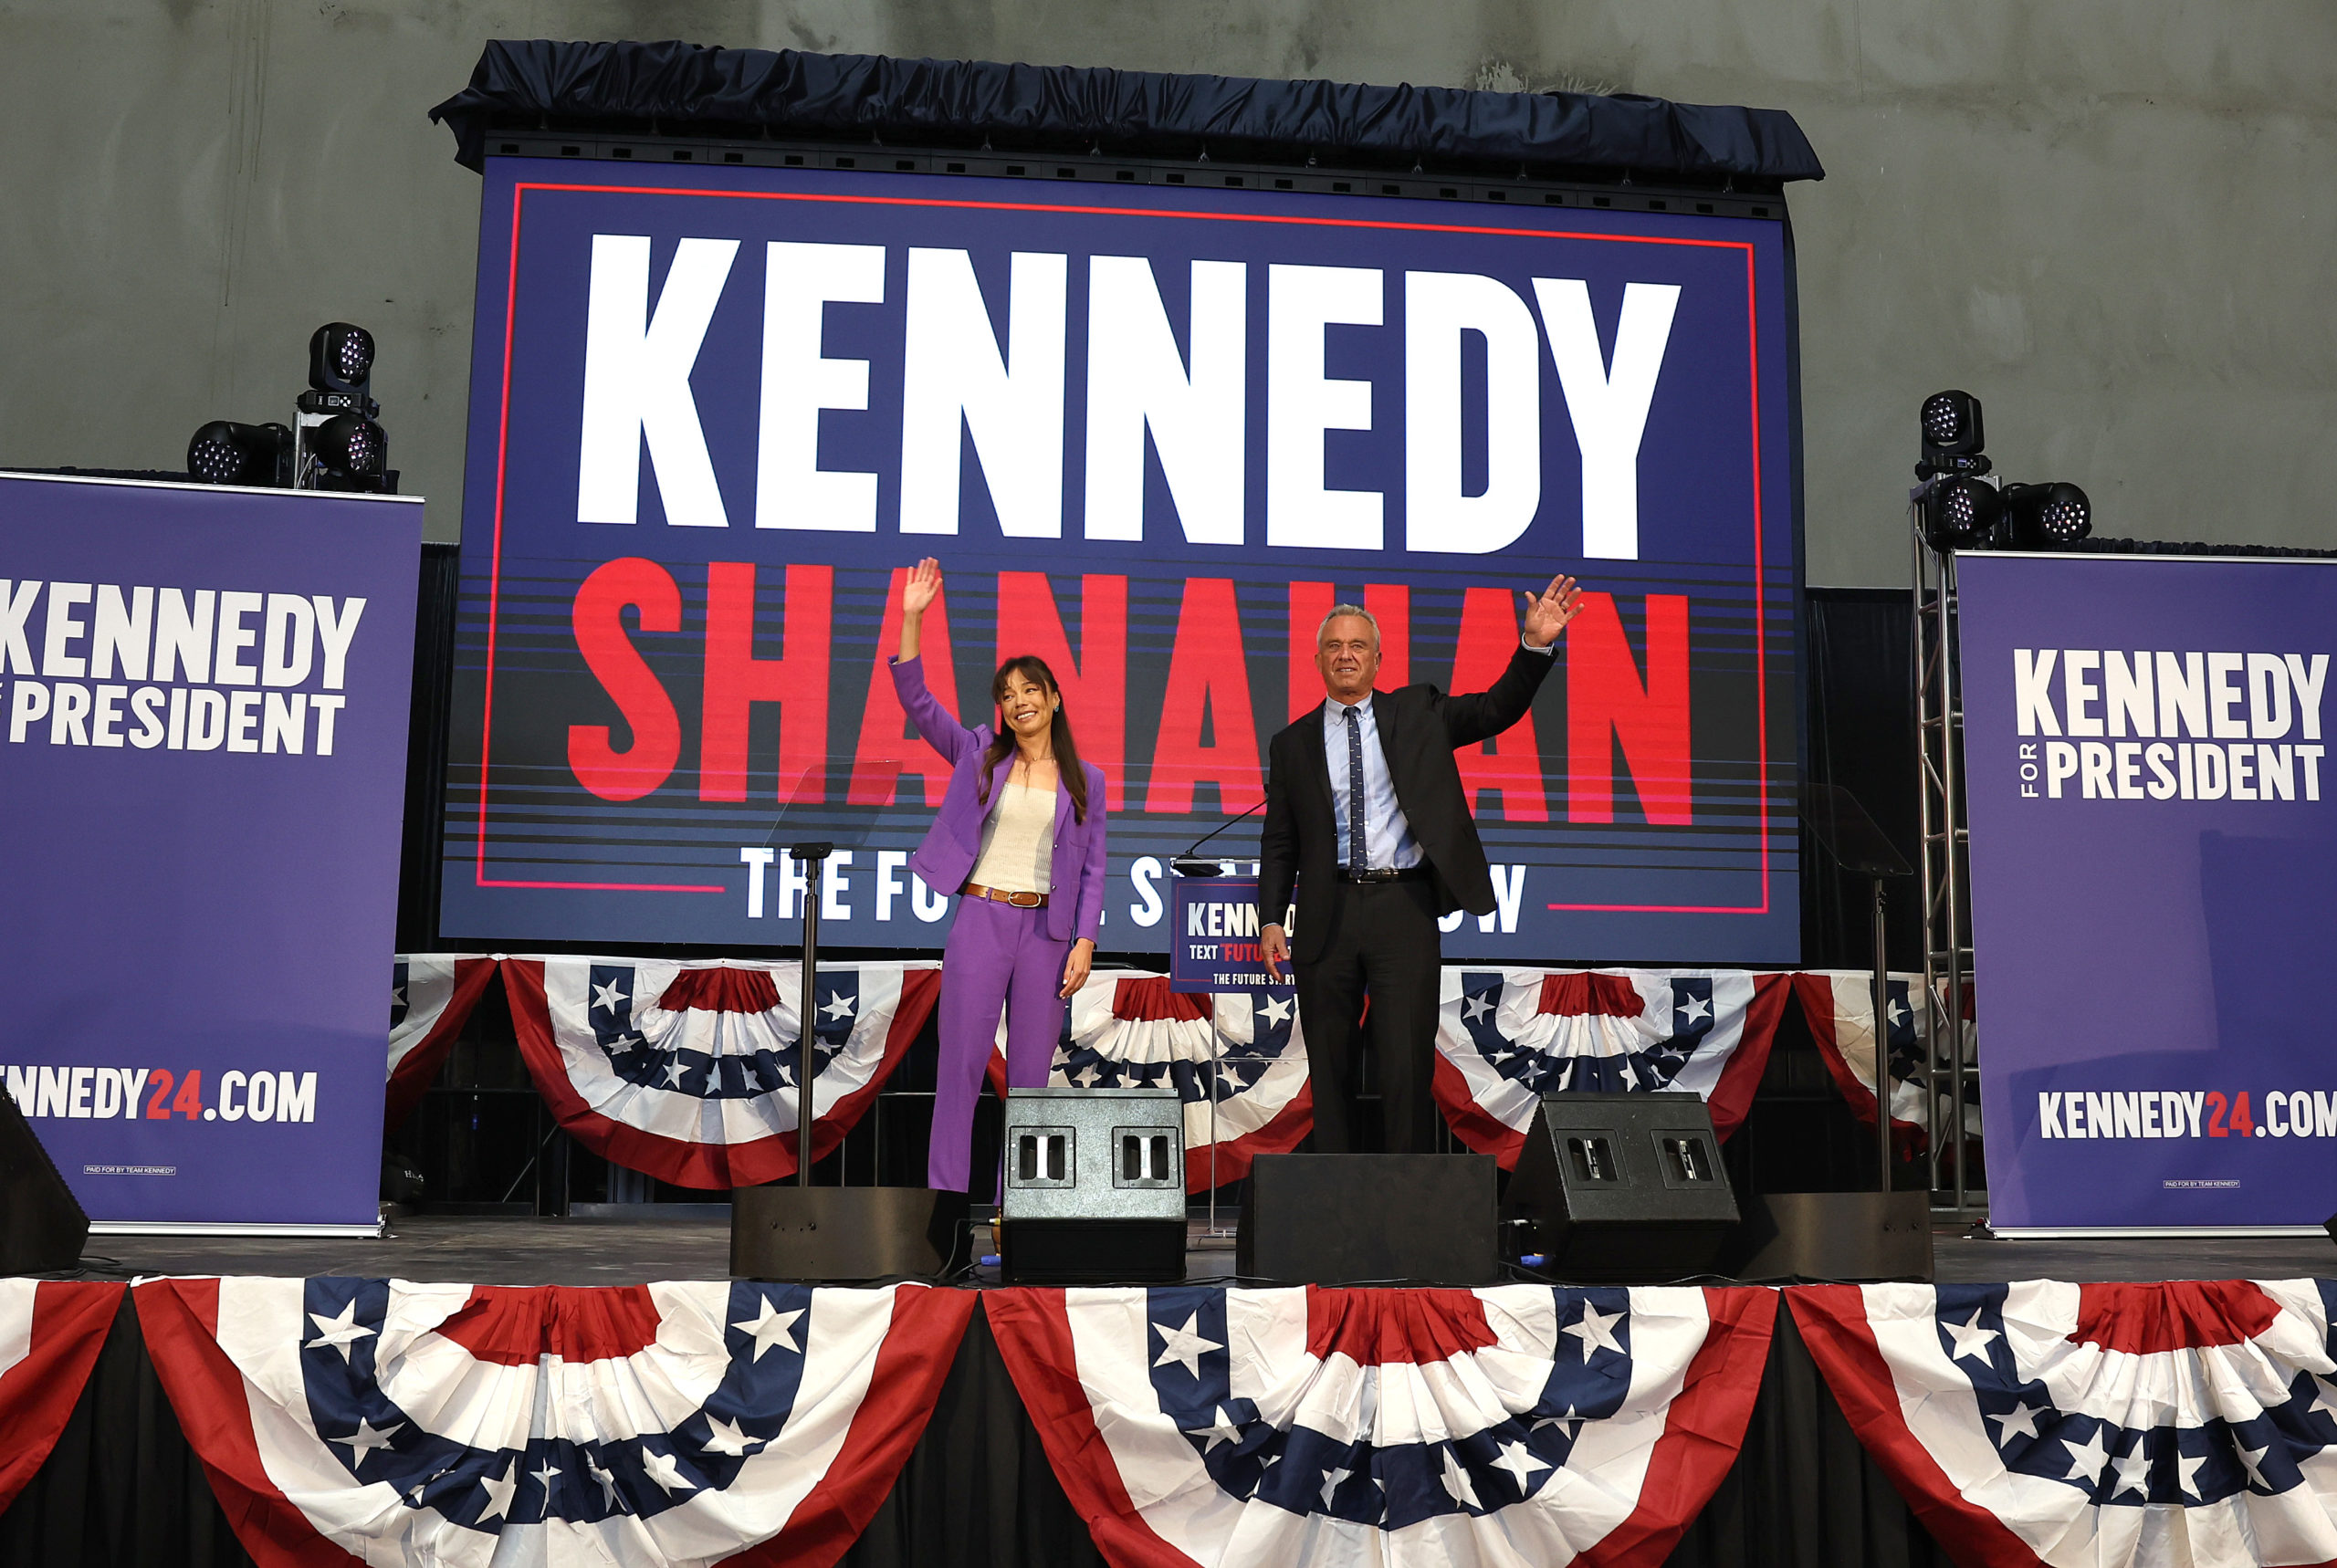 OAKLAND, CALIFORNIA - MARCH 26: Independent presidential candidate Robert F. Kennedy Jr. (R) and his vice presidential pick Nicole Shanahan take the stage during a campaign event to announce his pick for a running mate at the Henry J. Kaiser Event Center on March 26, 2024 in Oakland, California. Nicole Shanahan is an attorney and tech entrepreneur based in the San Francisco Bay Area. (Photo by Justin Sullivan/Getty Images)